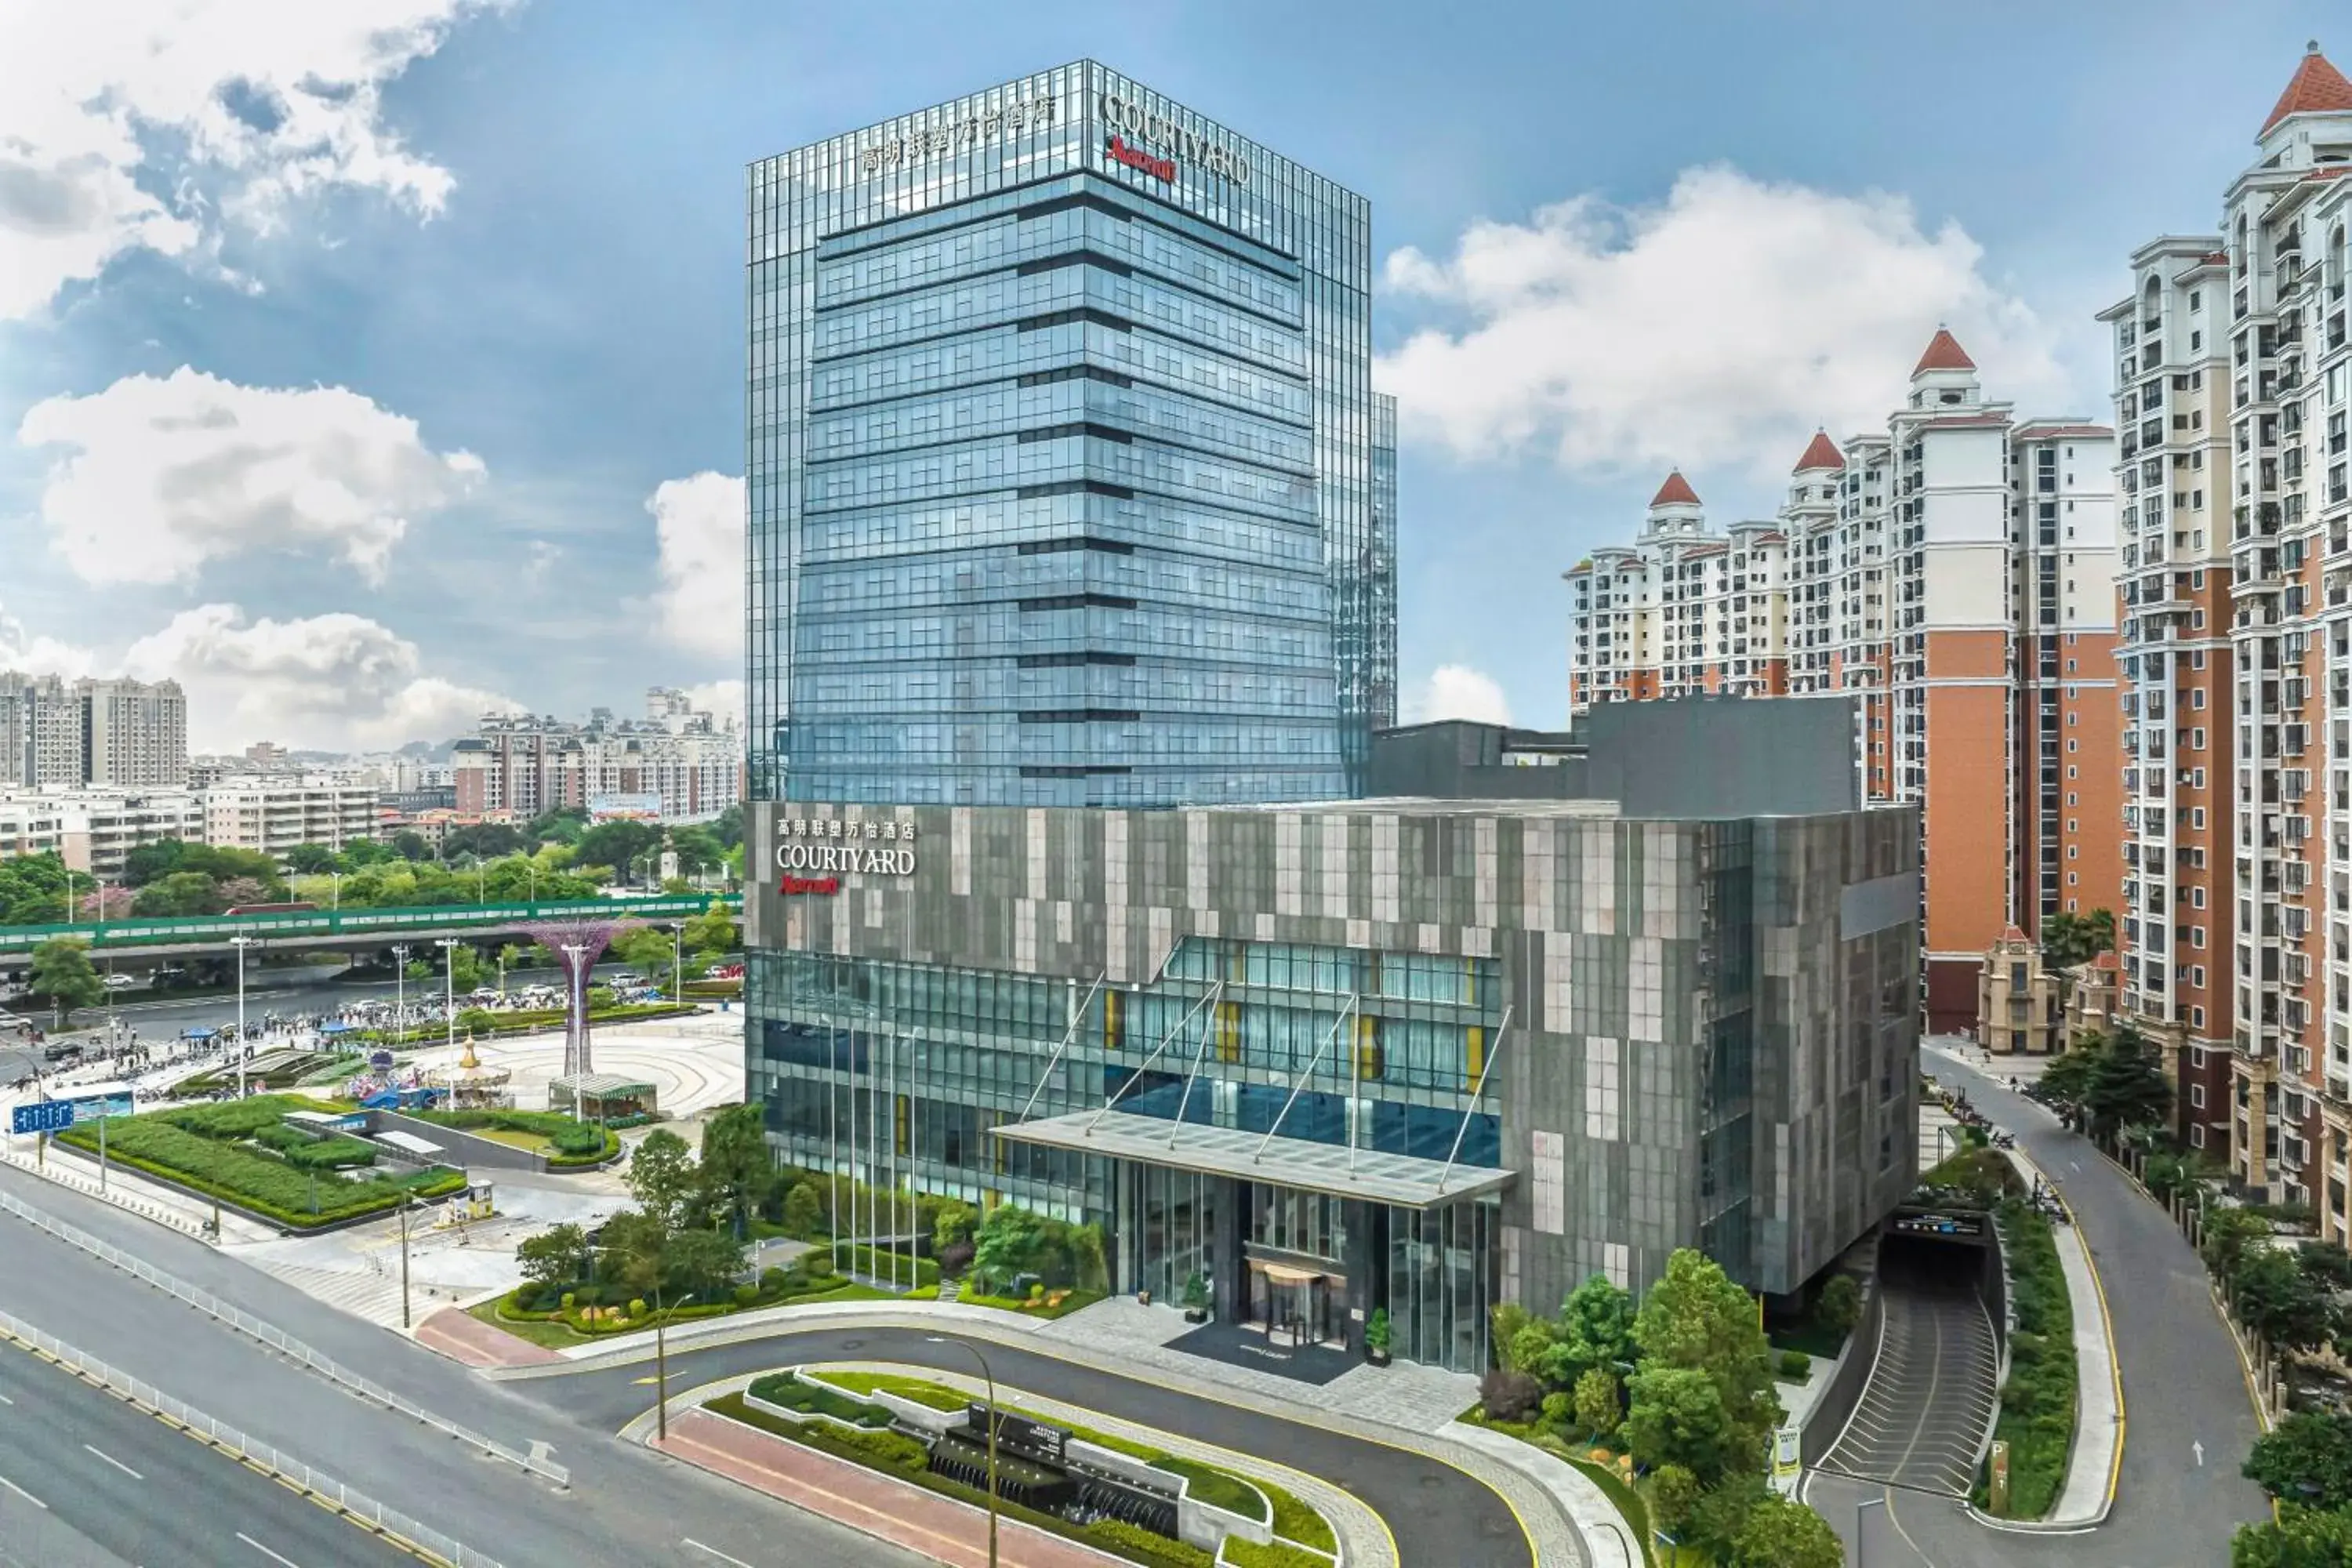 Property building in Courtyard by Marriott Foshan Gaoming